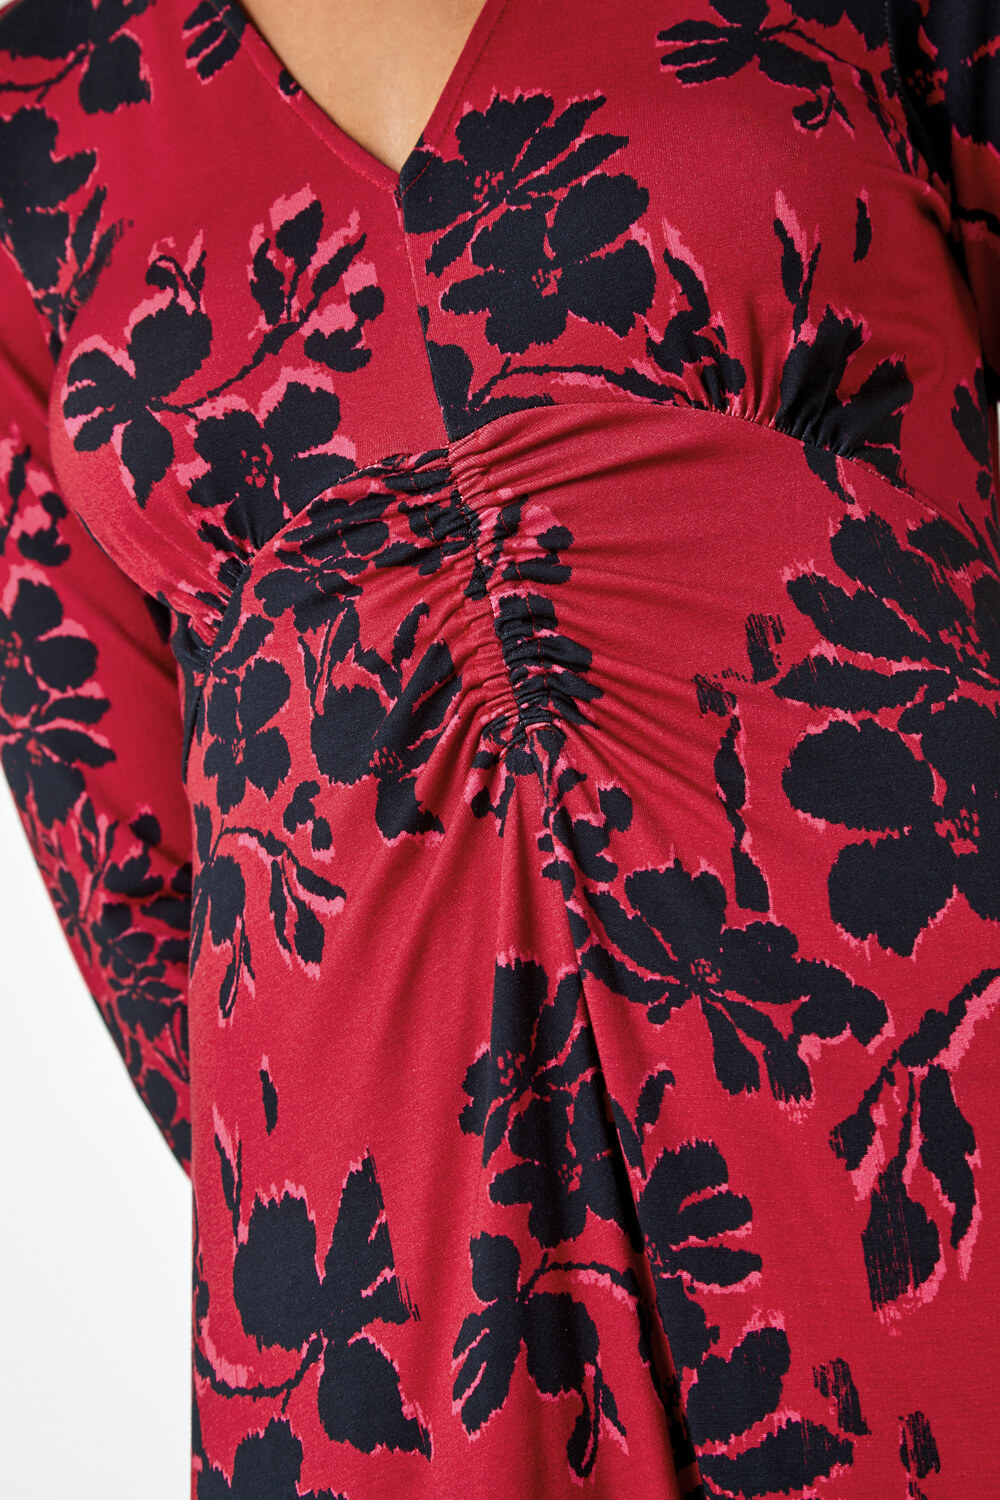 Red Floral Print Ruched Midi Stretch Dress, Image 5 of 5